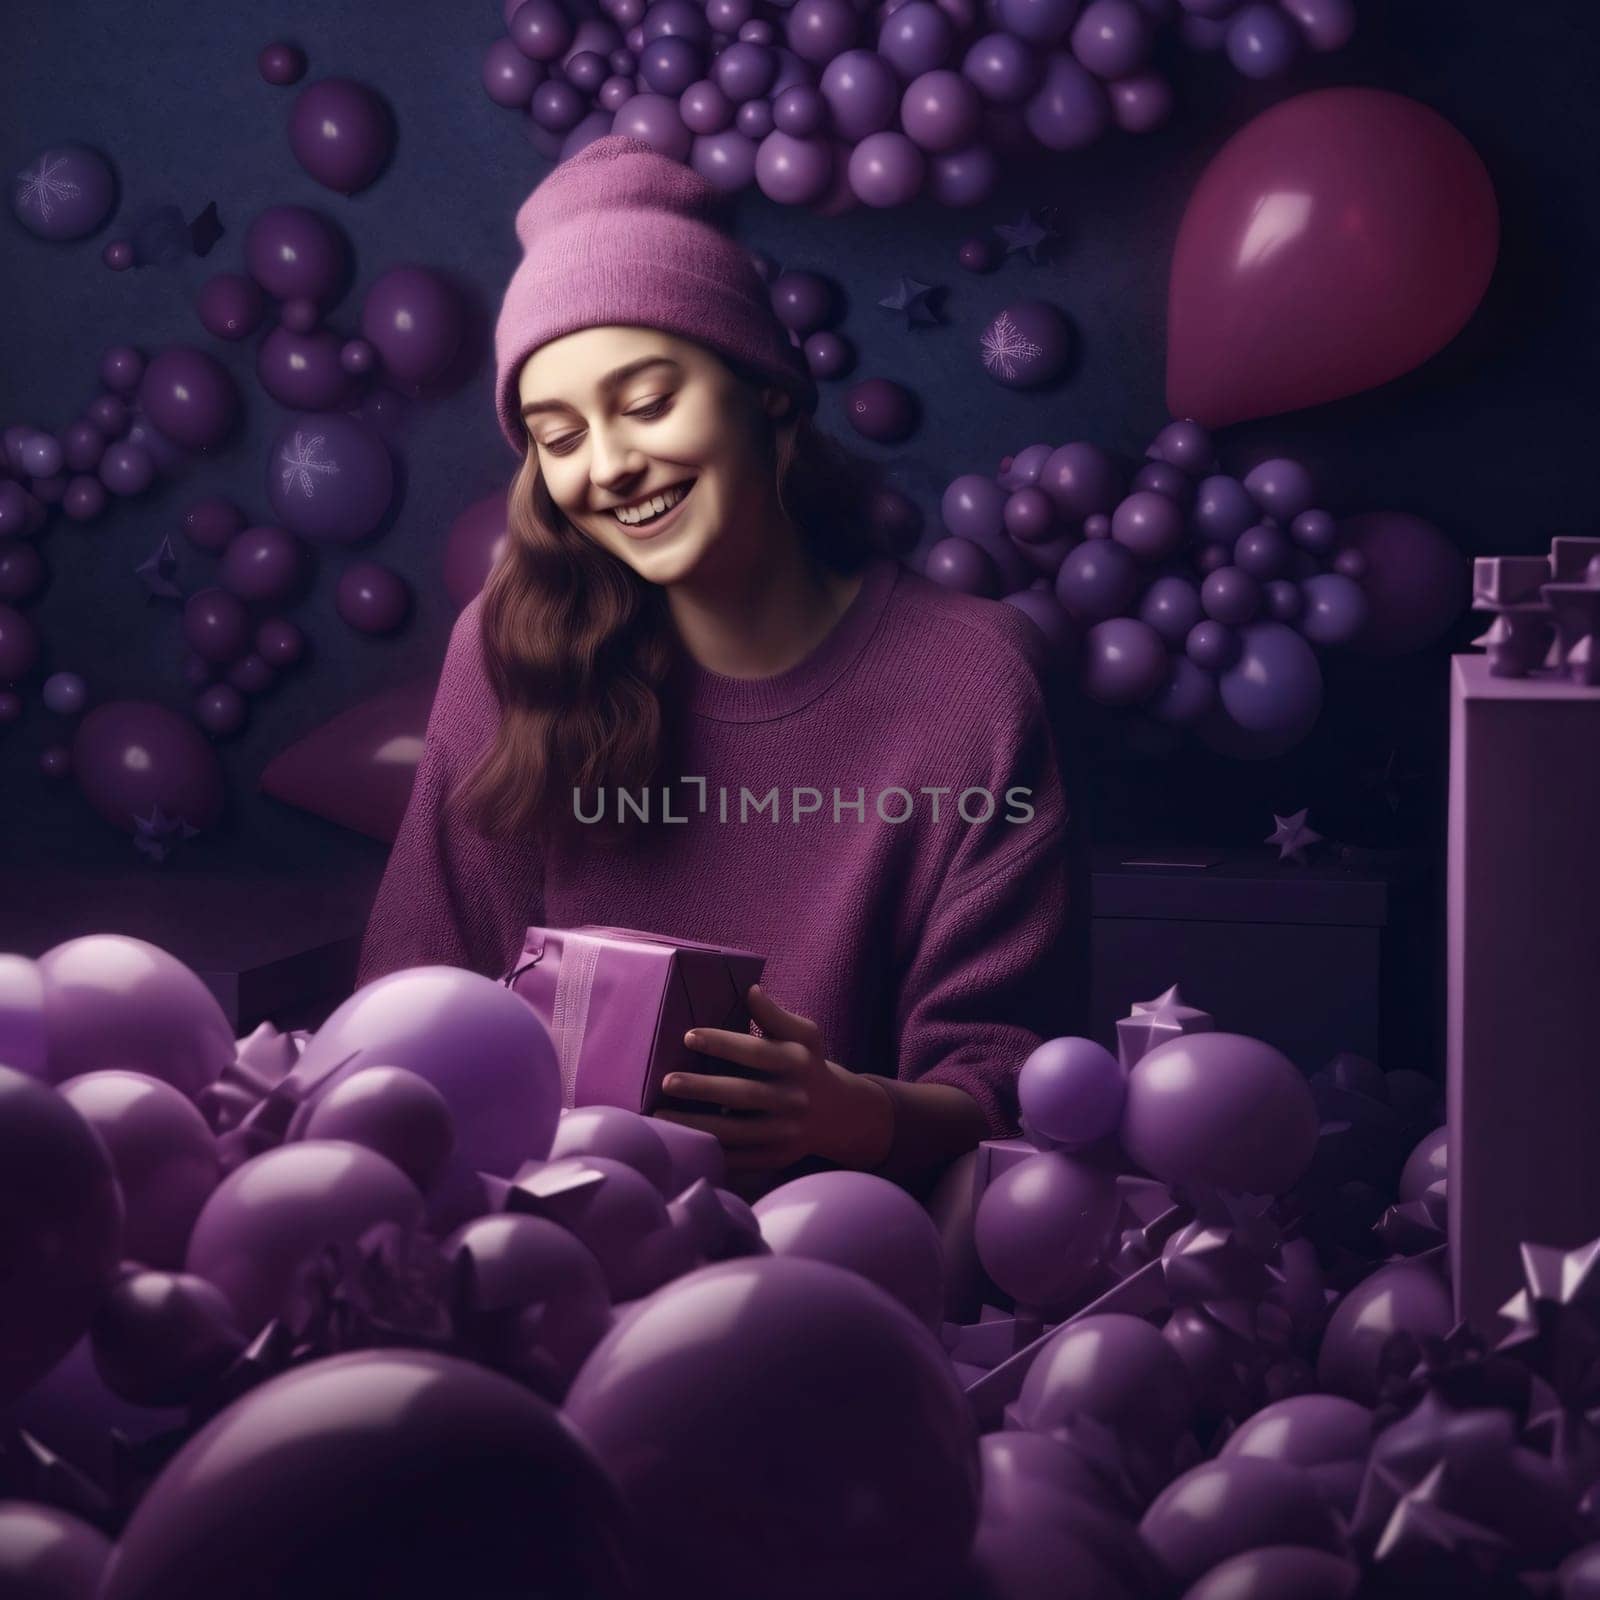 Purple balloons around a woman in a purple outfit. Gifts as a day symbol of present and love. by ThemesS